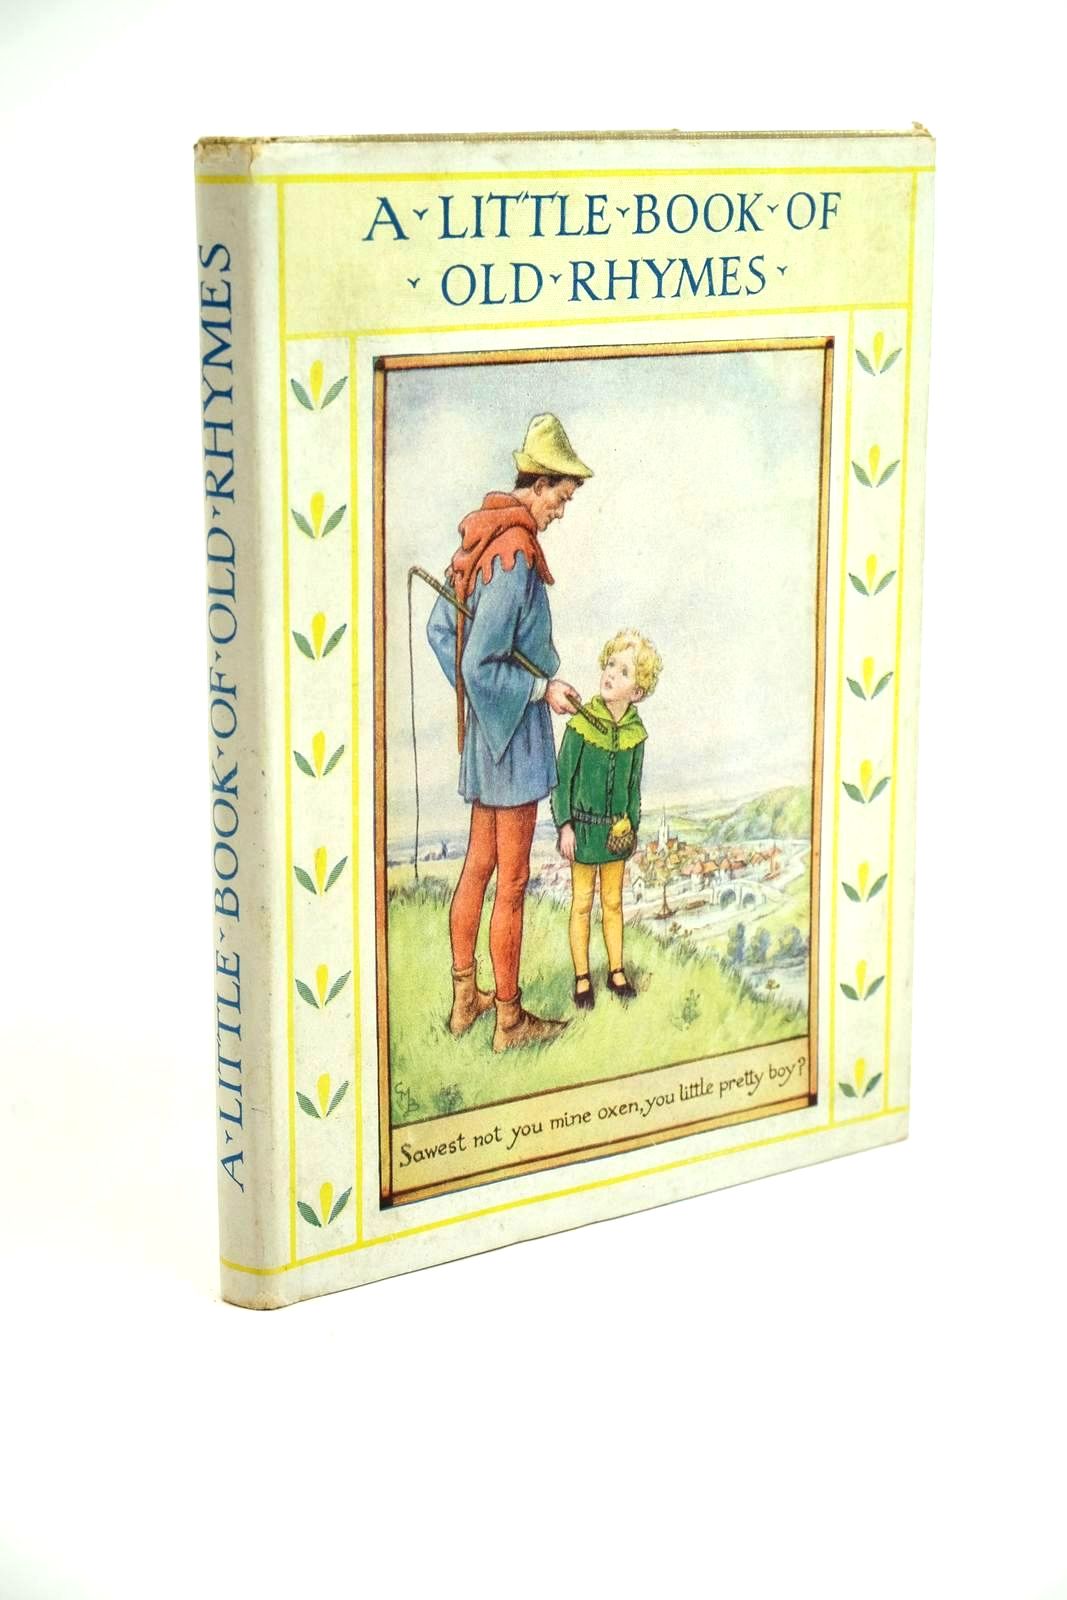 Photo of A LITTLE BOOK OF OLD RHYMES written by Barker, Cicely Mary illustrated by Barker, Cicely Mary published by Blackie & Son Ltd. (STOCK CODE: 1321682)  for sale by Stella & Rose's Books